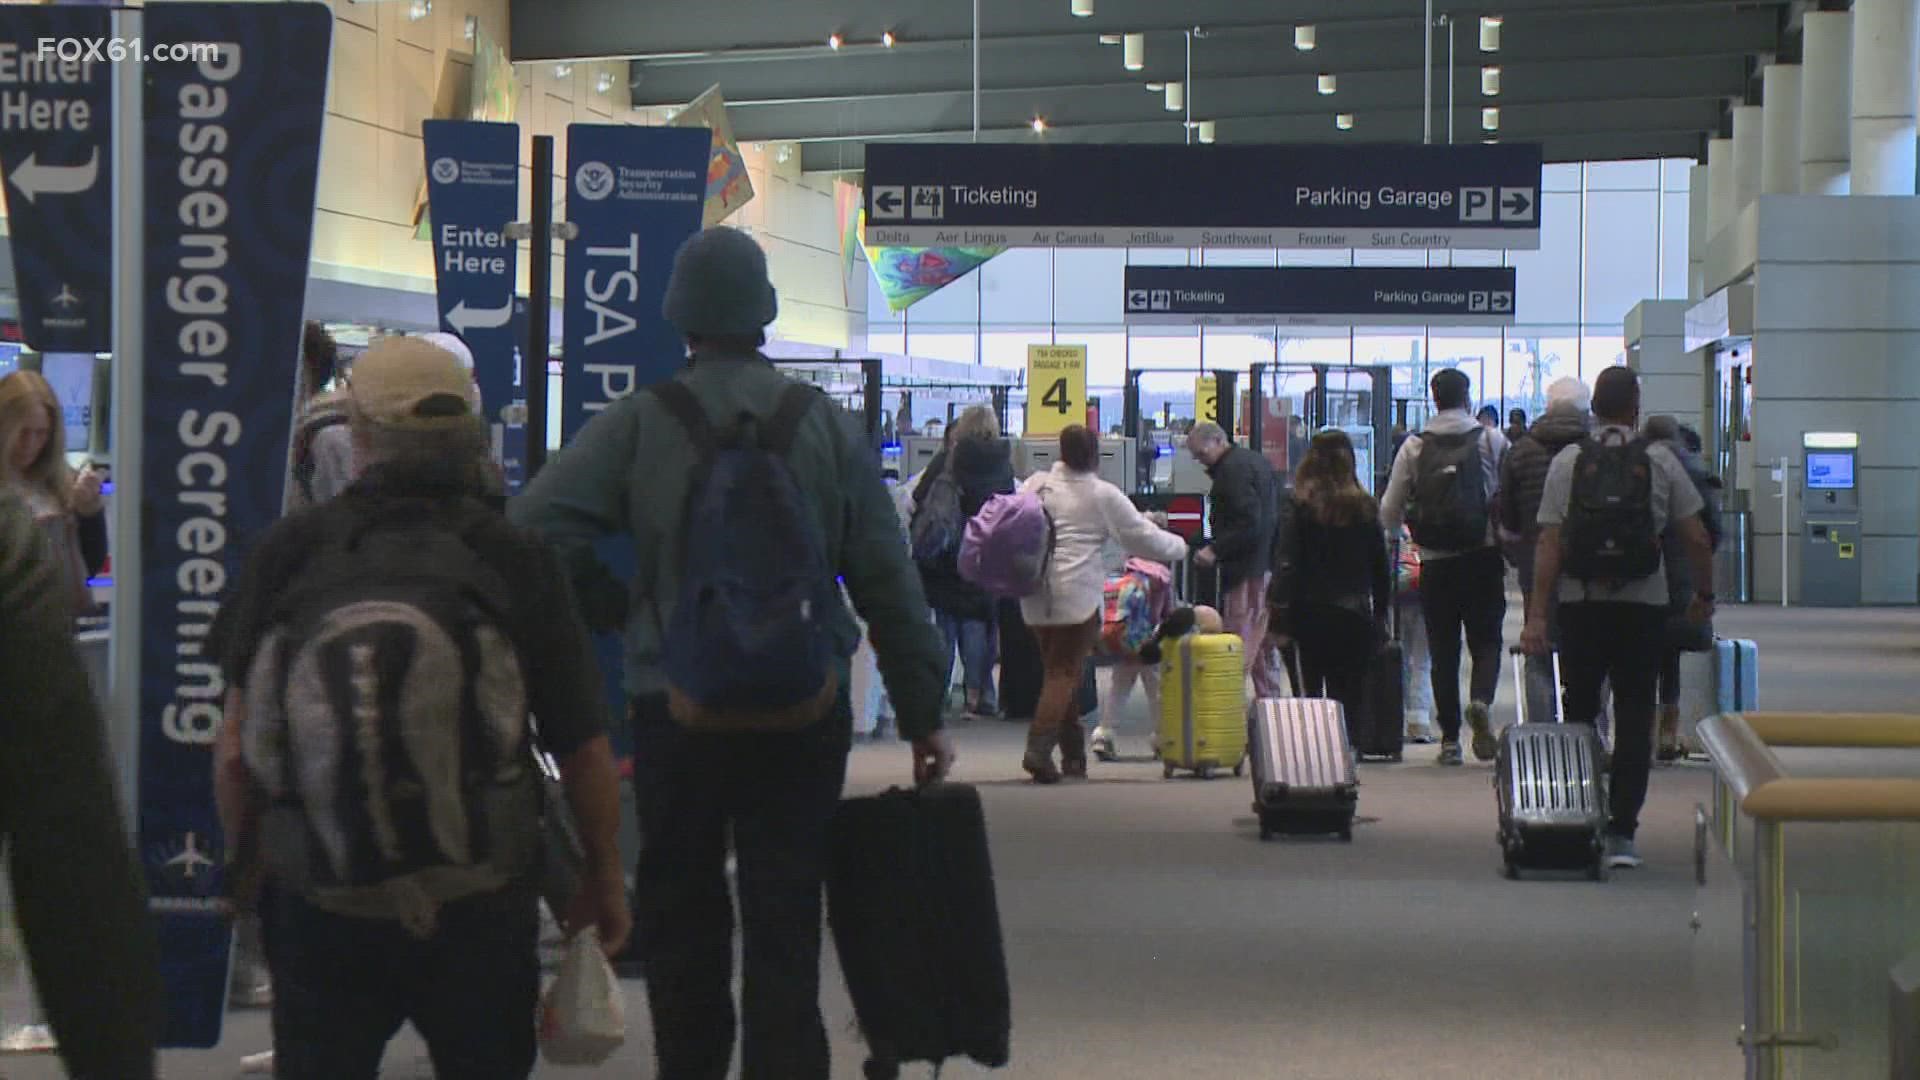 Thousands of people boarded planes across the country Tuesday on the busiest travel day before and after Thanksgiving.